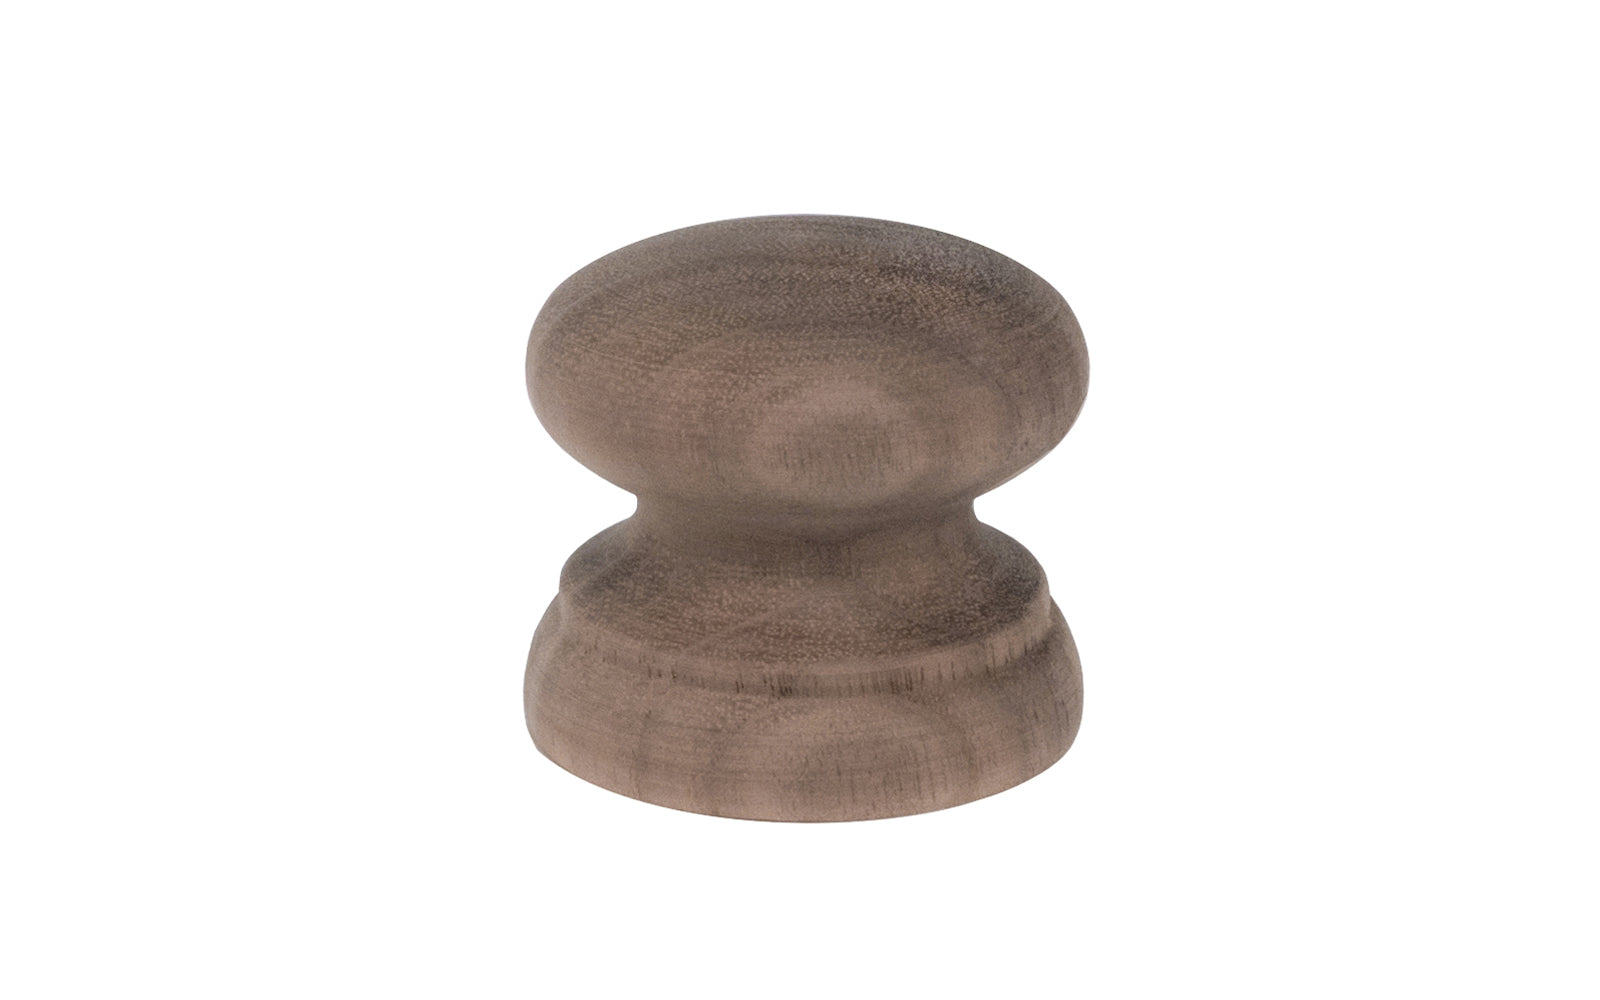 A classic walnut wood round cabinet knob with a large pedestal shaped base. Made of unfinished walnut wood. These knobs may be stained, painted, or varnished if desired. 1-3/8" Diameter Knob.